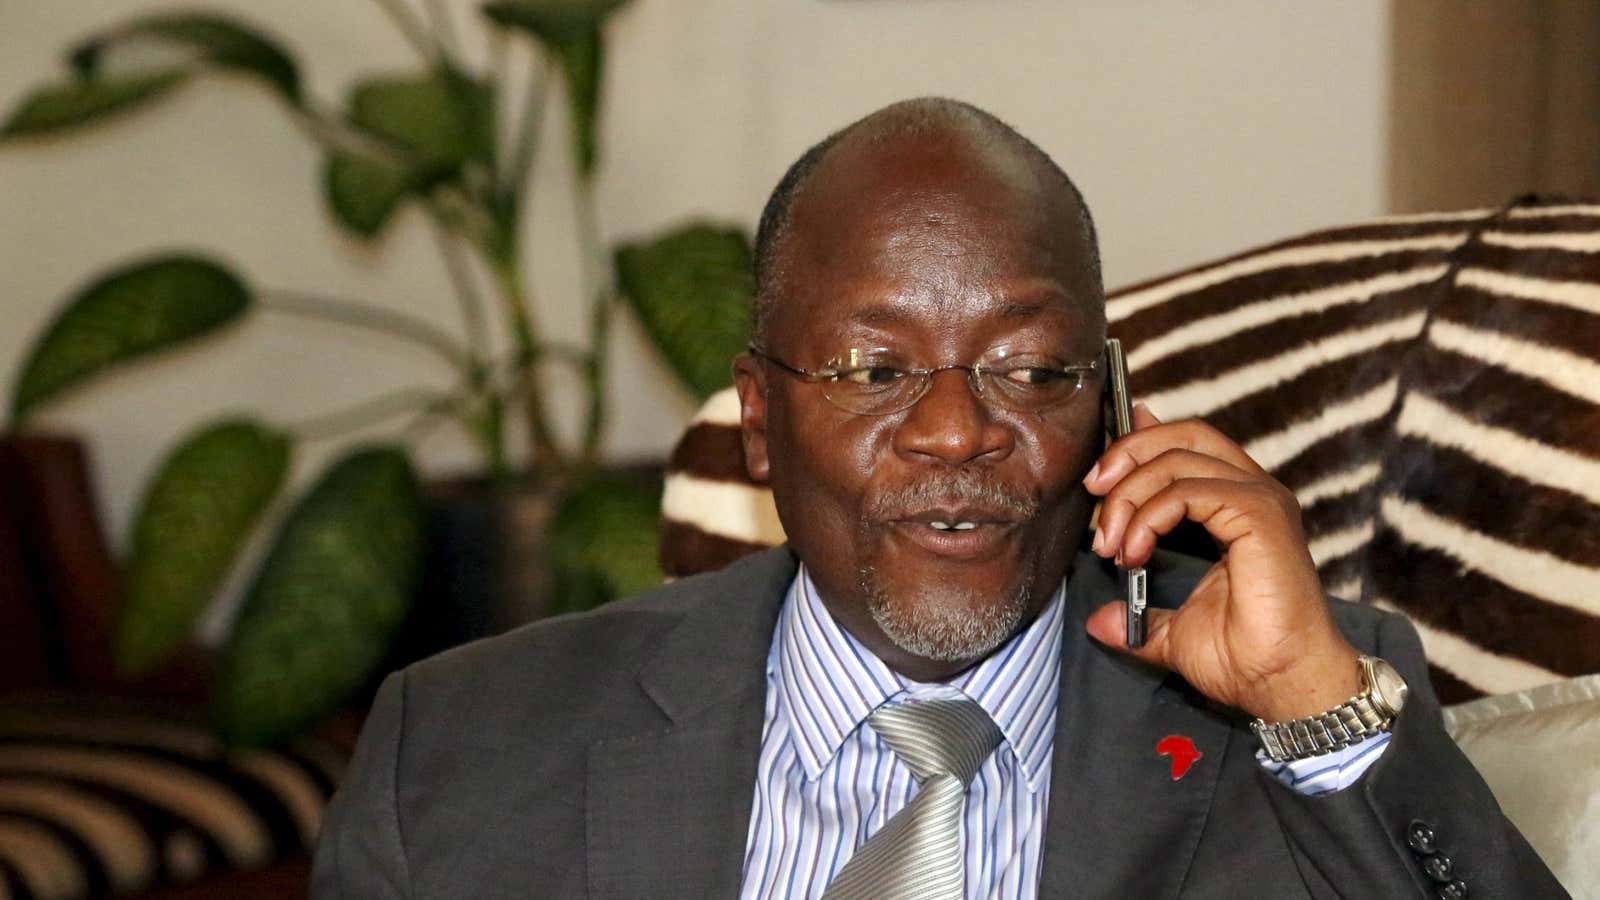 Magufuli: “You couldn’t say that to me on WhatsApp.”